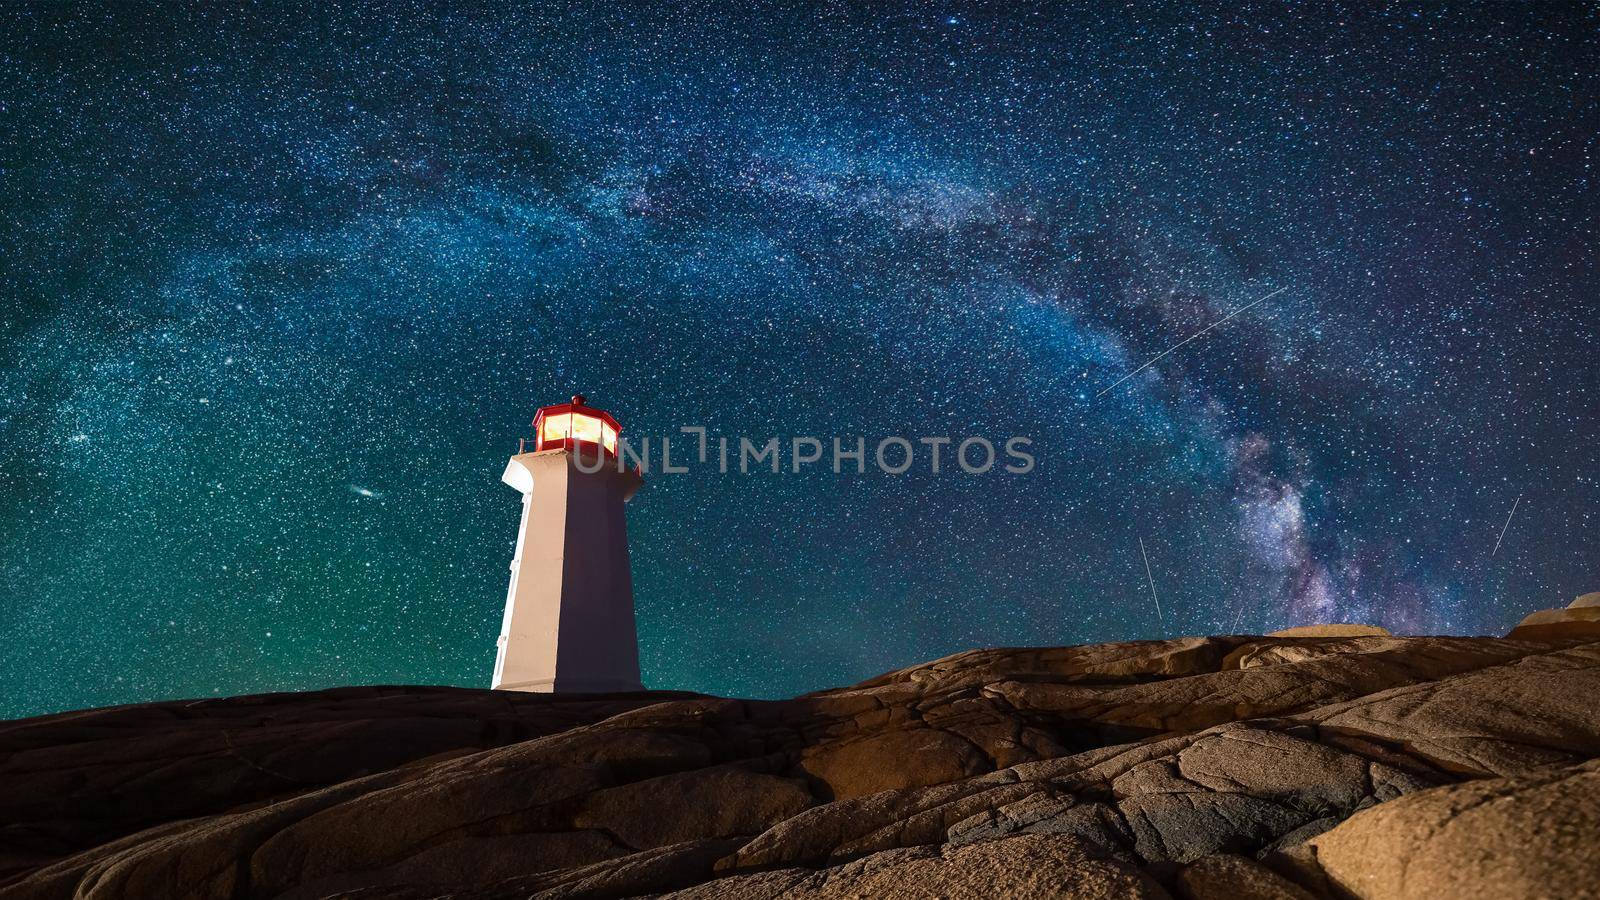 Lighthouse surrounded by rocks at night, lighthouse with lights on at night